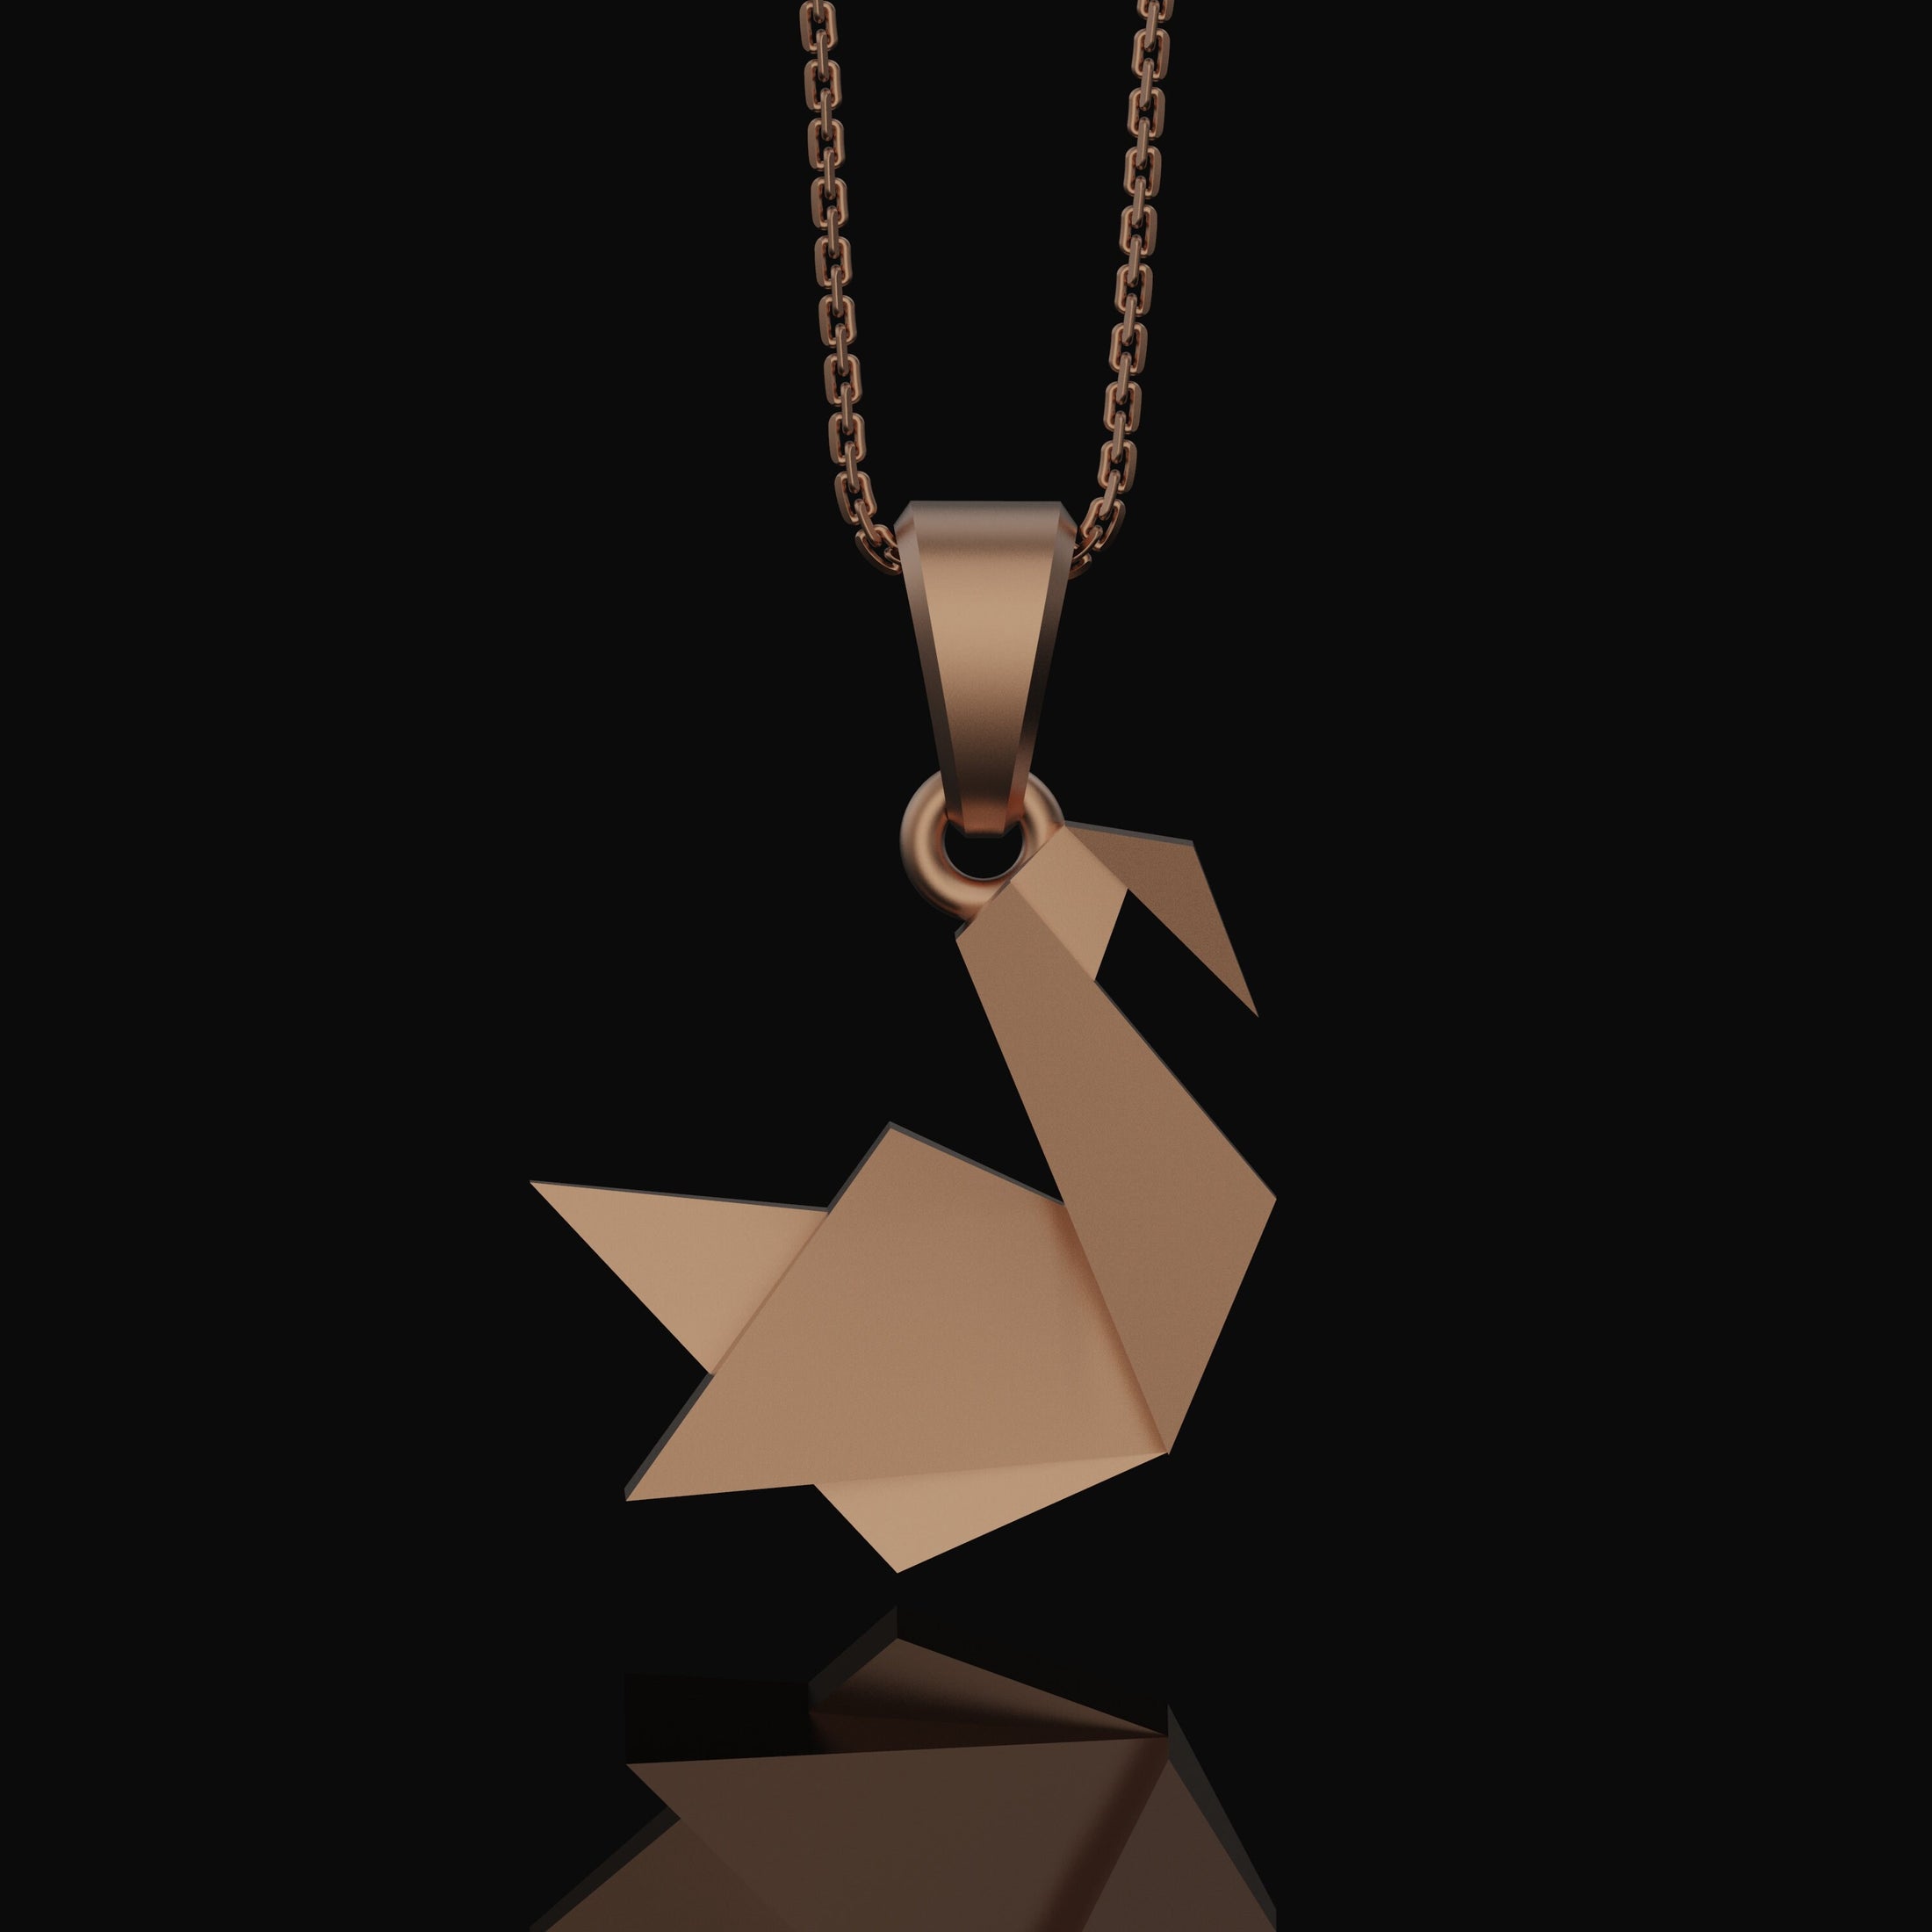 Silver Origami Swan Charm Necklace - Elegant Folded Swan Pendant, Chic and Artistic, Graceful Nature-Inspired Jewelry Rose Gold Finish